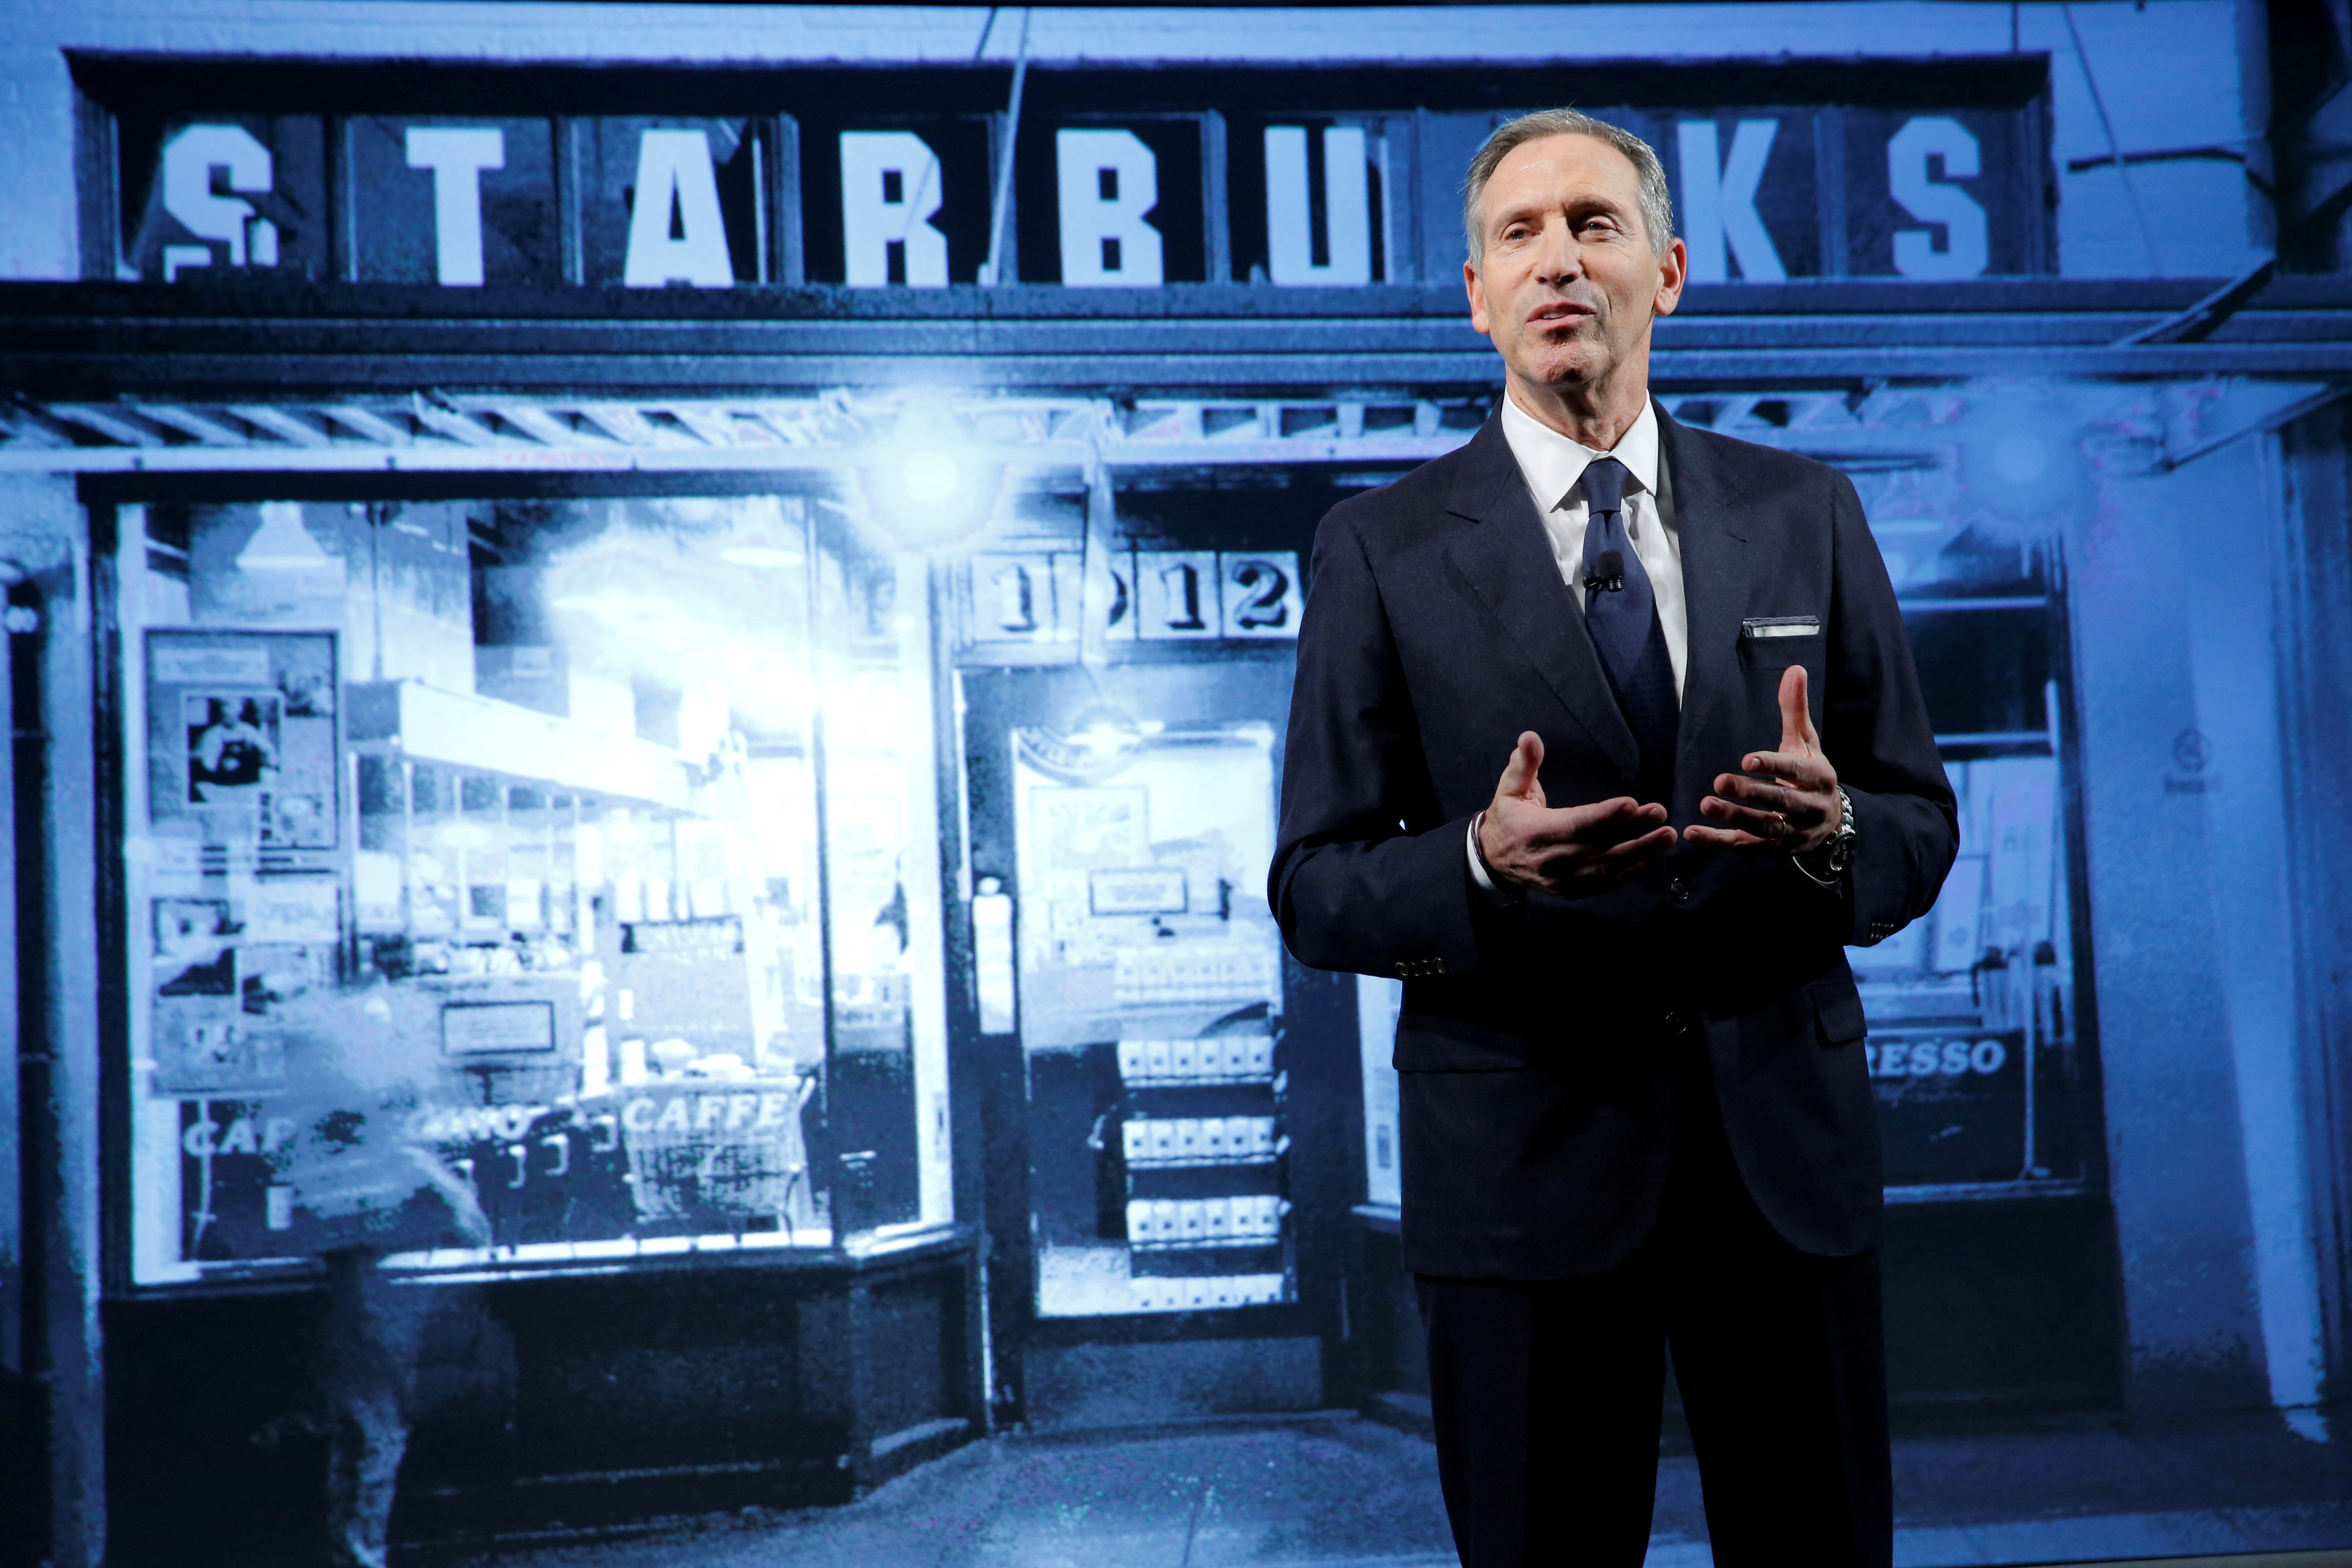 Starbucks Chairman and CEO Howard Schultz delivers remarks at the Starbucks 2016 Investor Day in Manhattan, New York